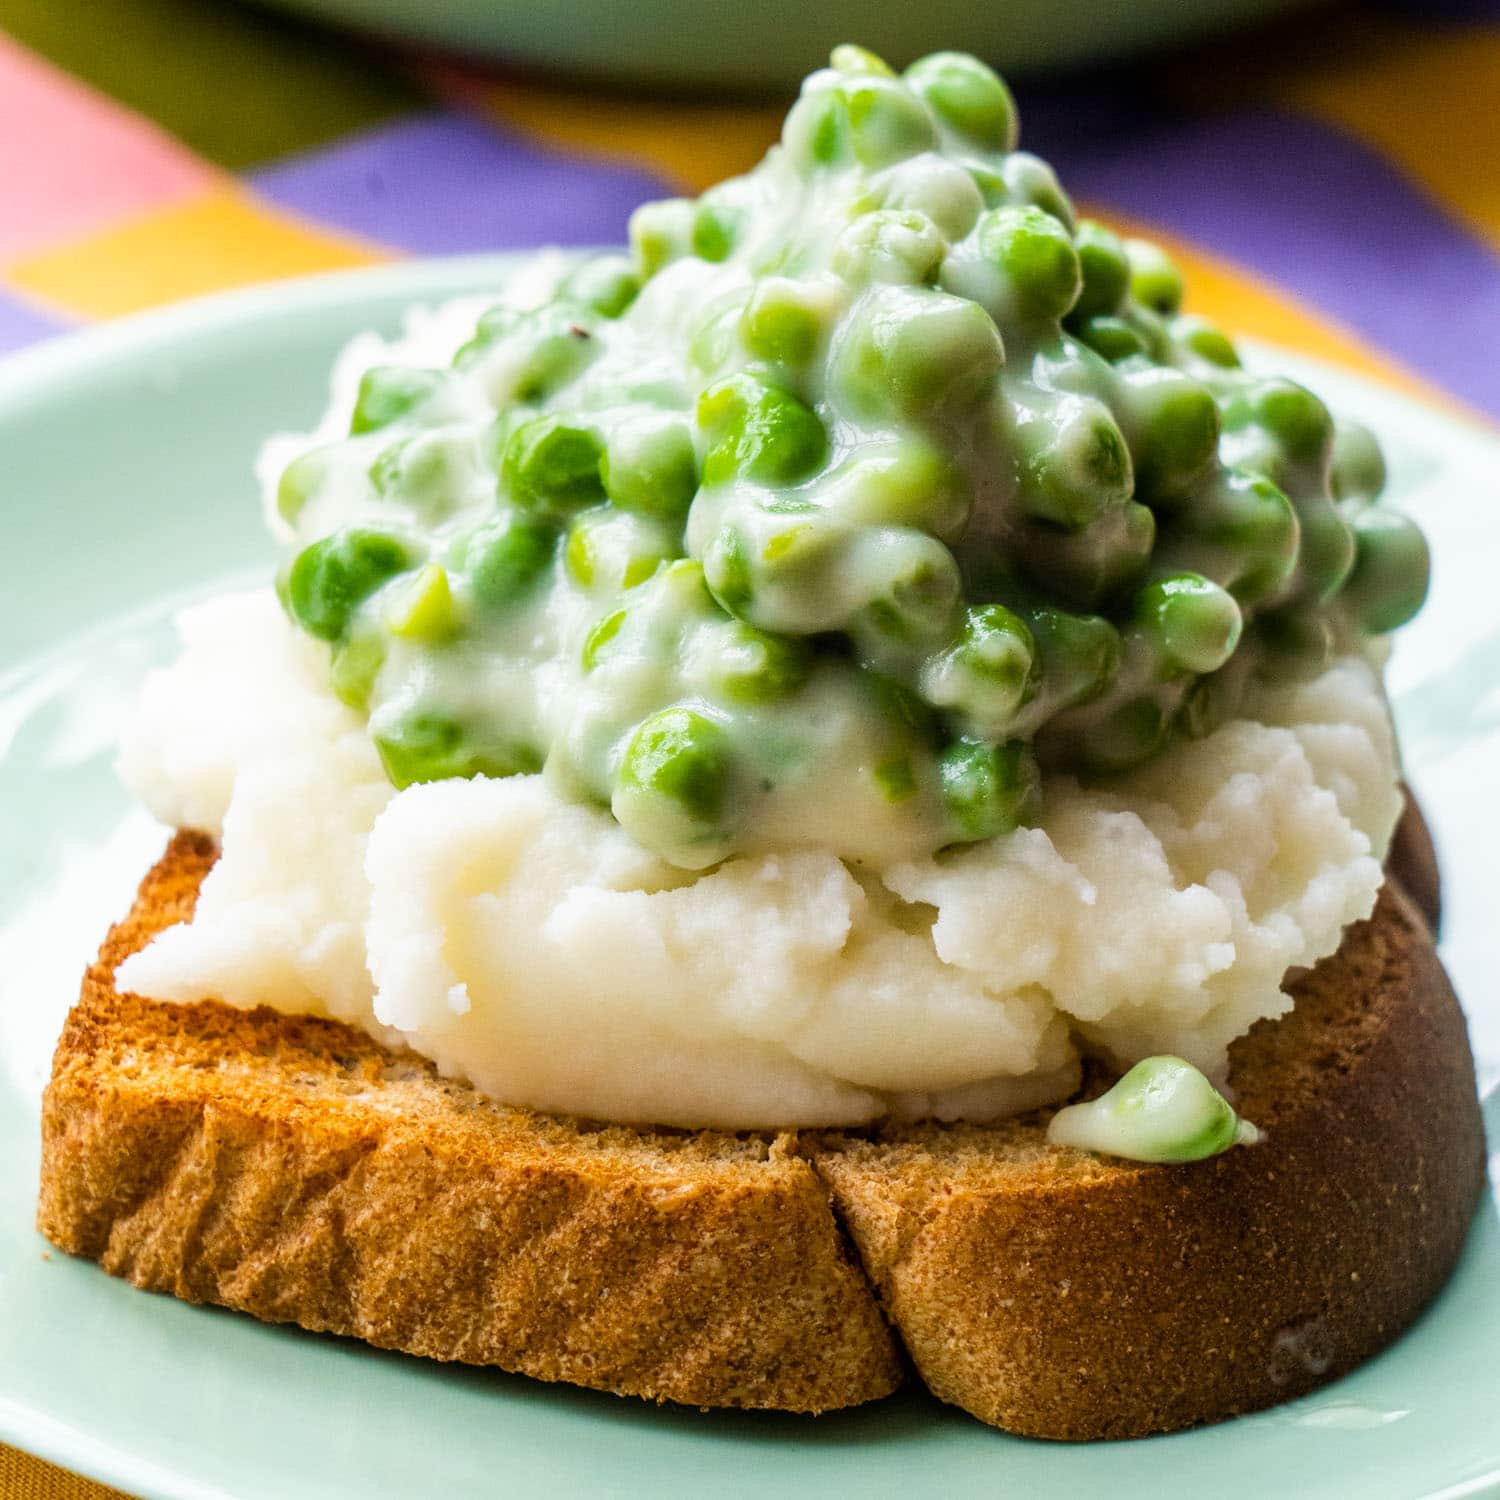 Creamed Peas (on Mashed Potatoes and Toast)